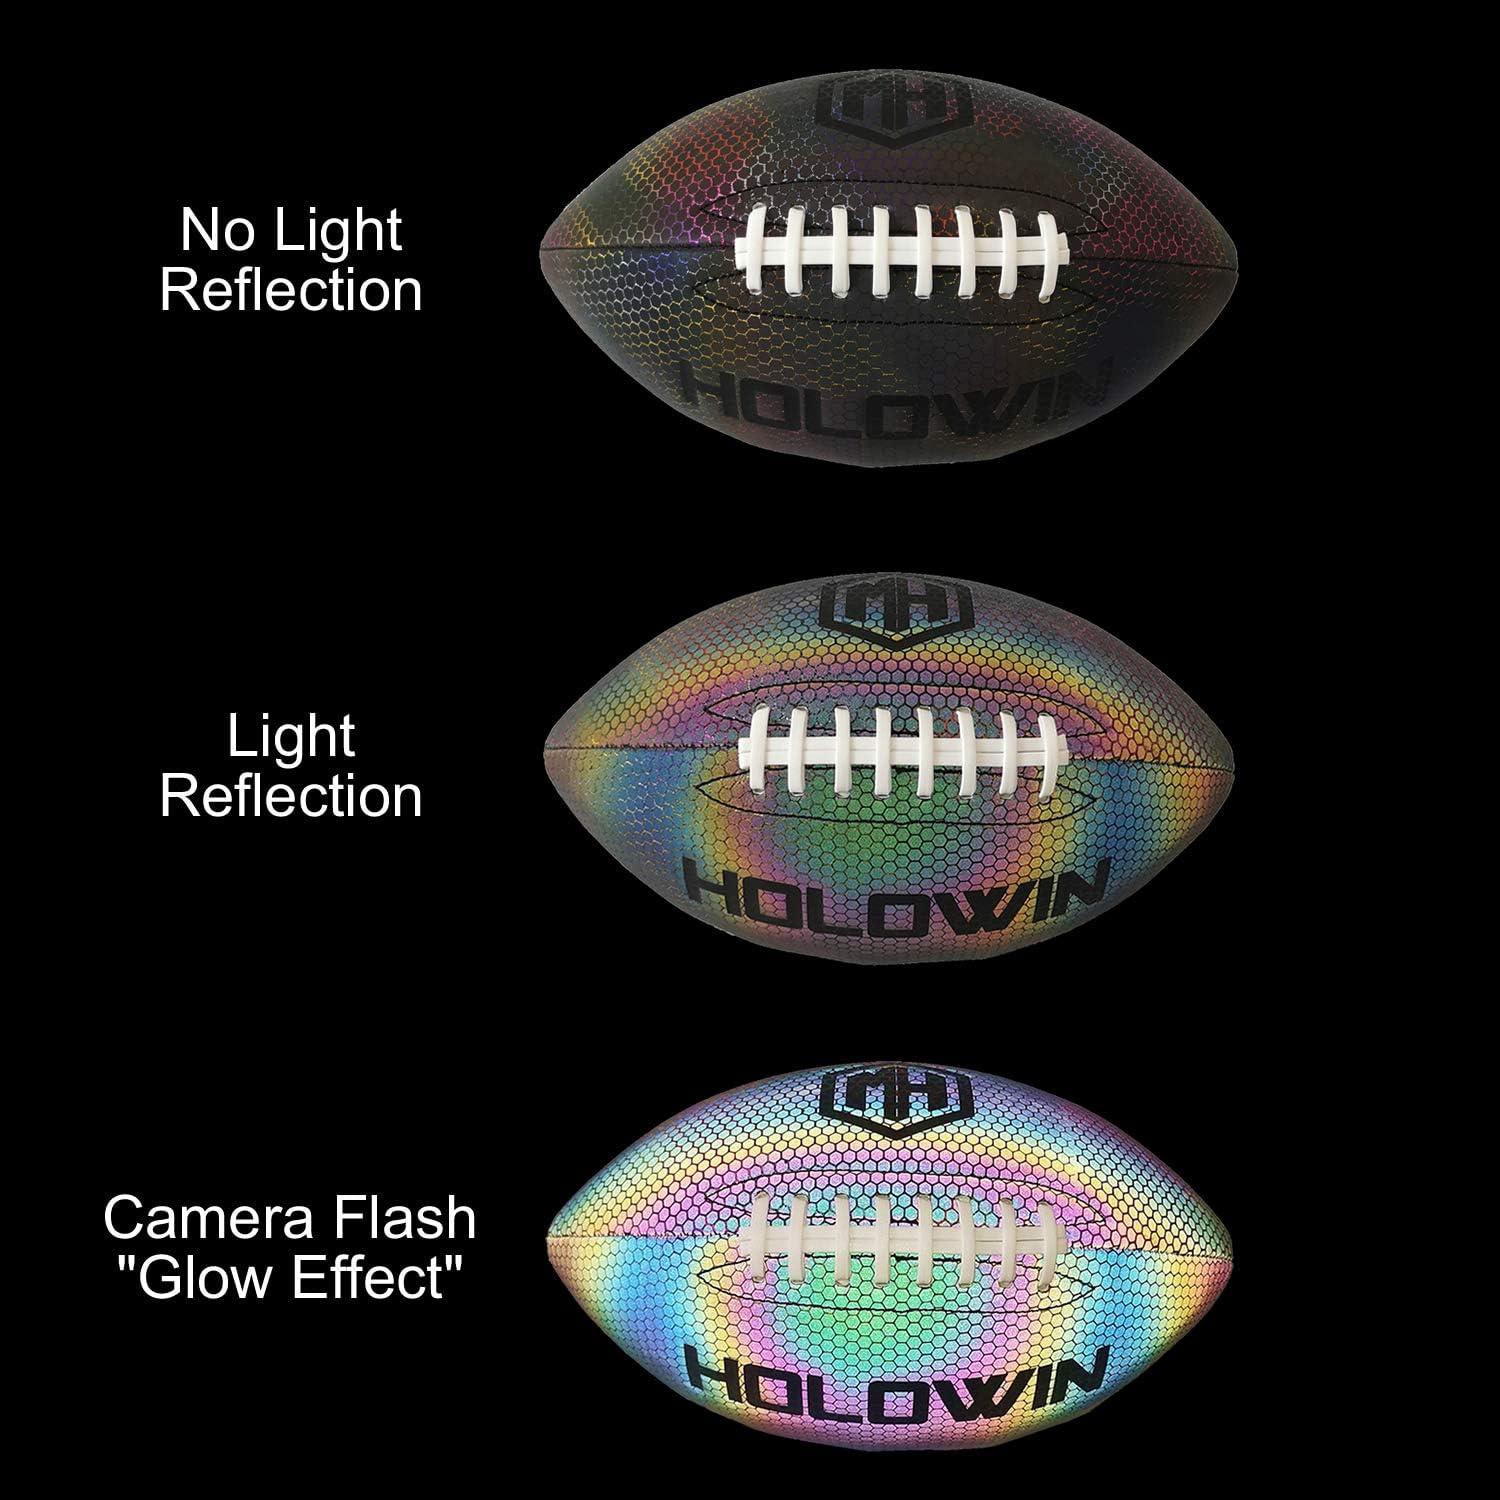 HOLOWIN Holographic Luminous Soccer Ball for Night Games & Training,  Glowing in The Dark Light Up Reflective with Camera Flash Reflects Light  Toy